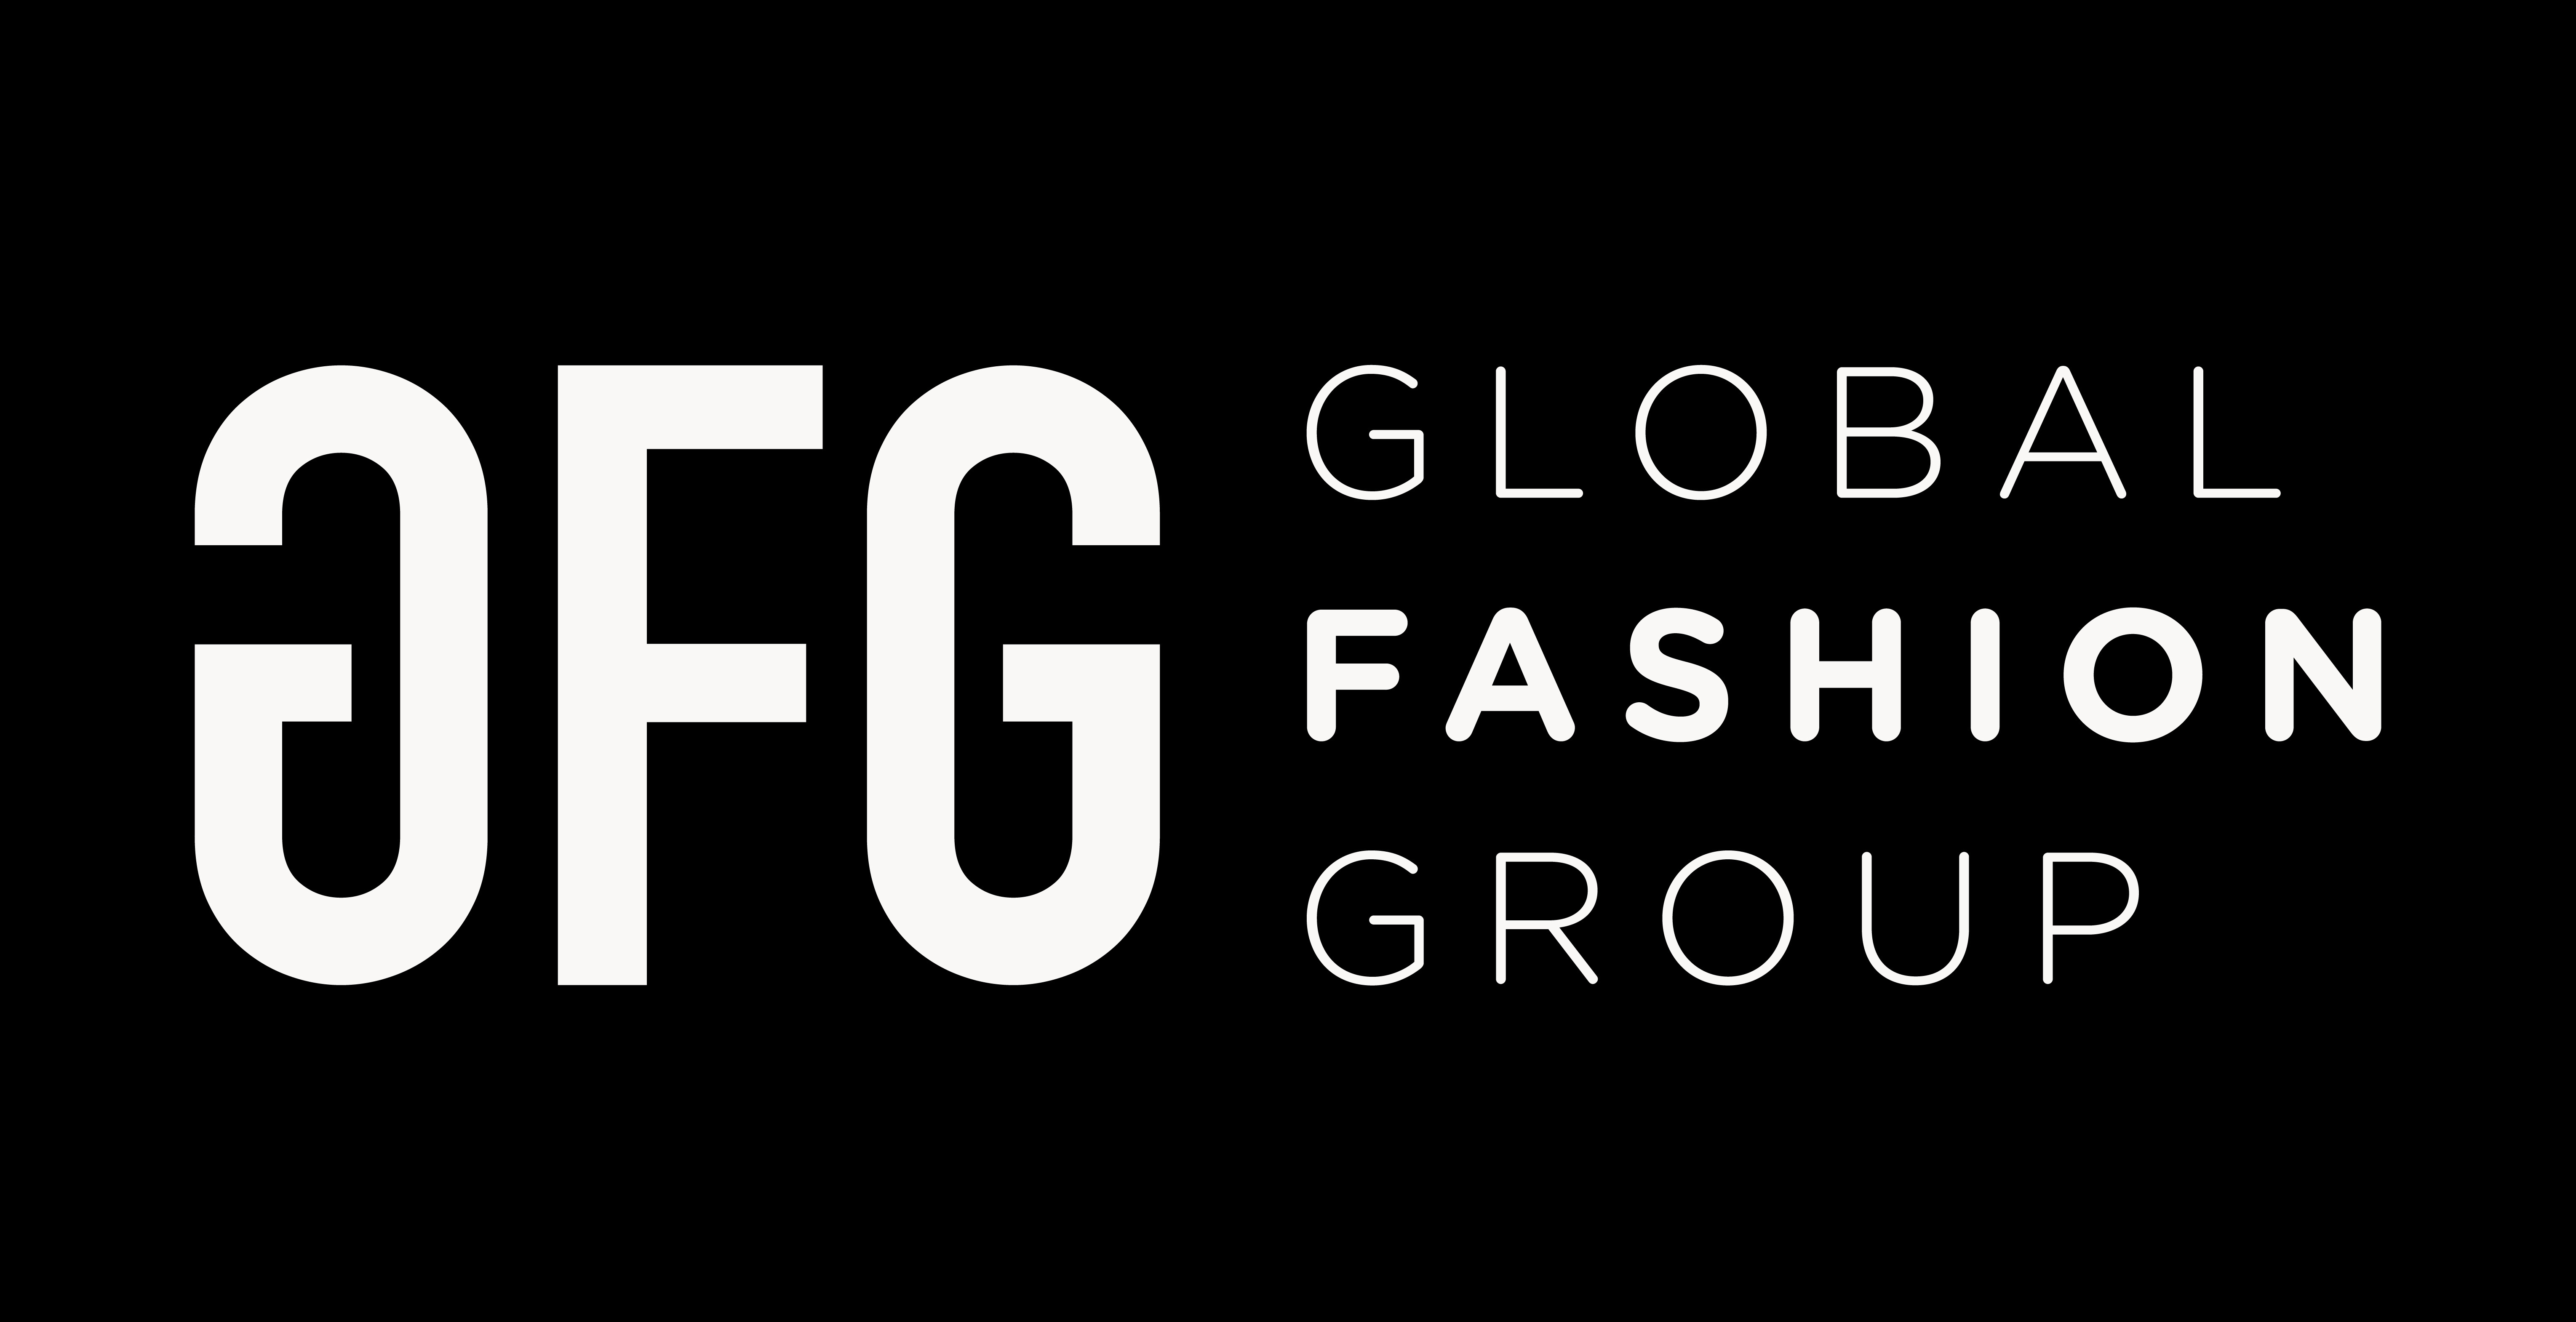 Global Fashion Group Vector Logo - Download Free SVG Icon